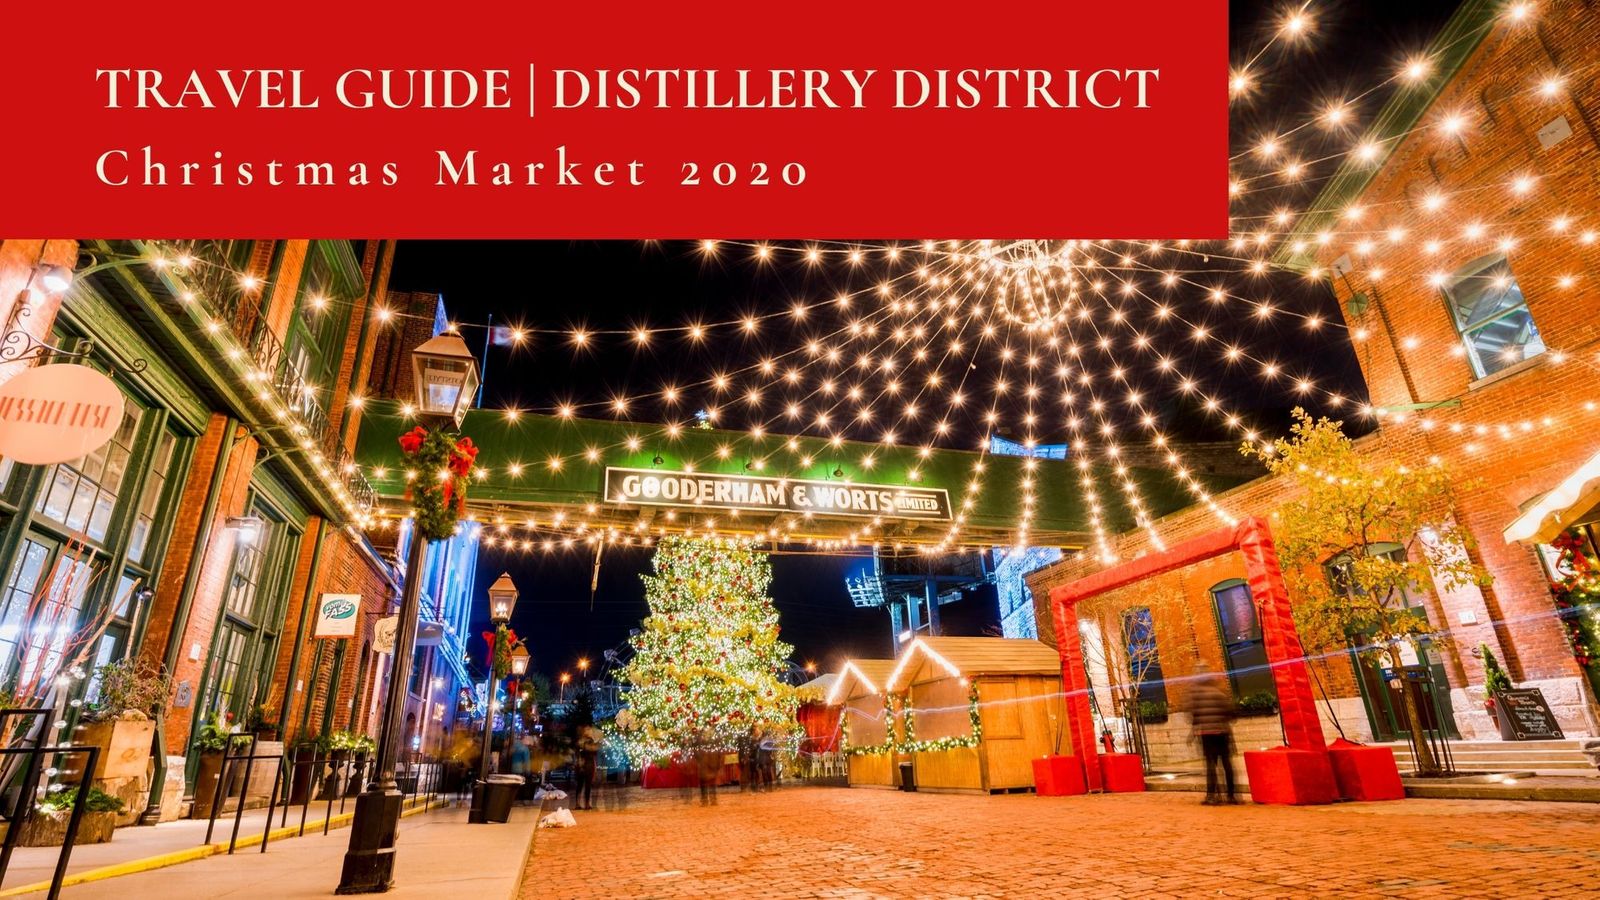 Travel Guide Distillery District Christmas Market 2020